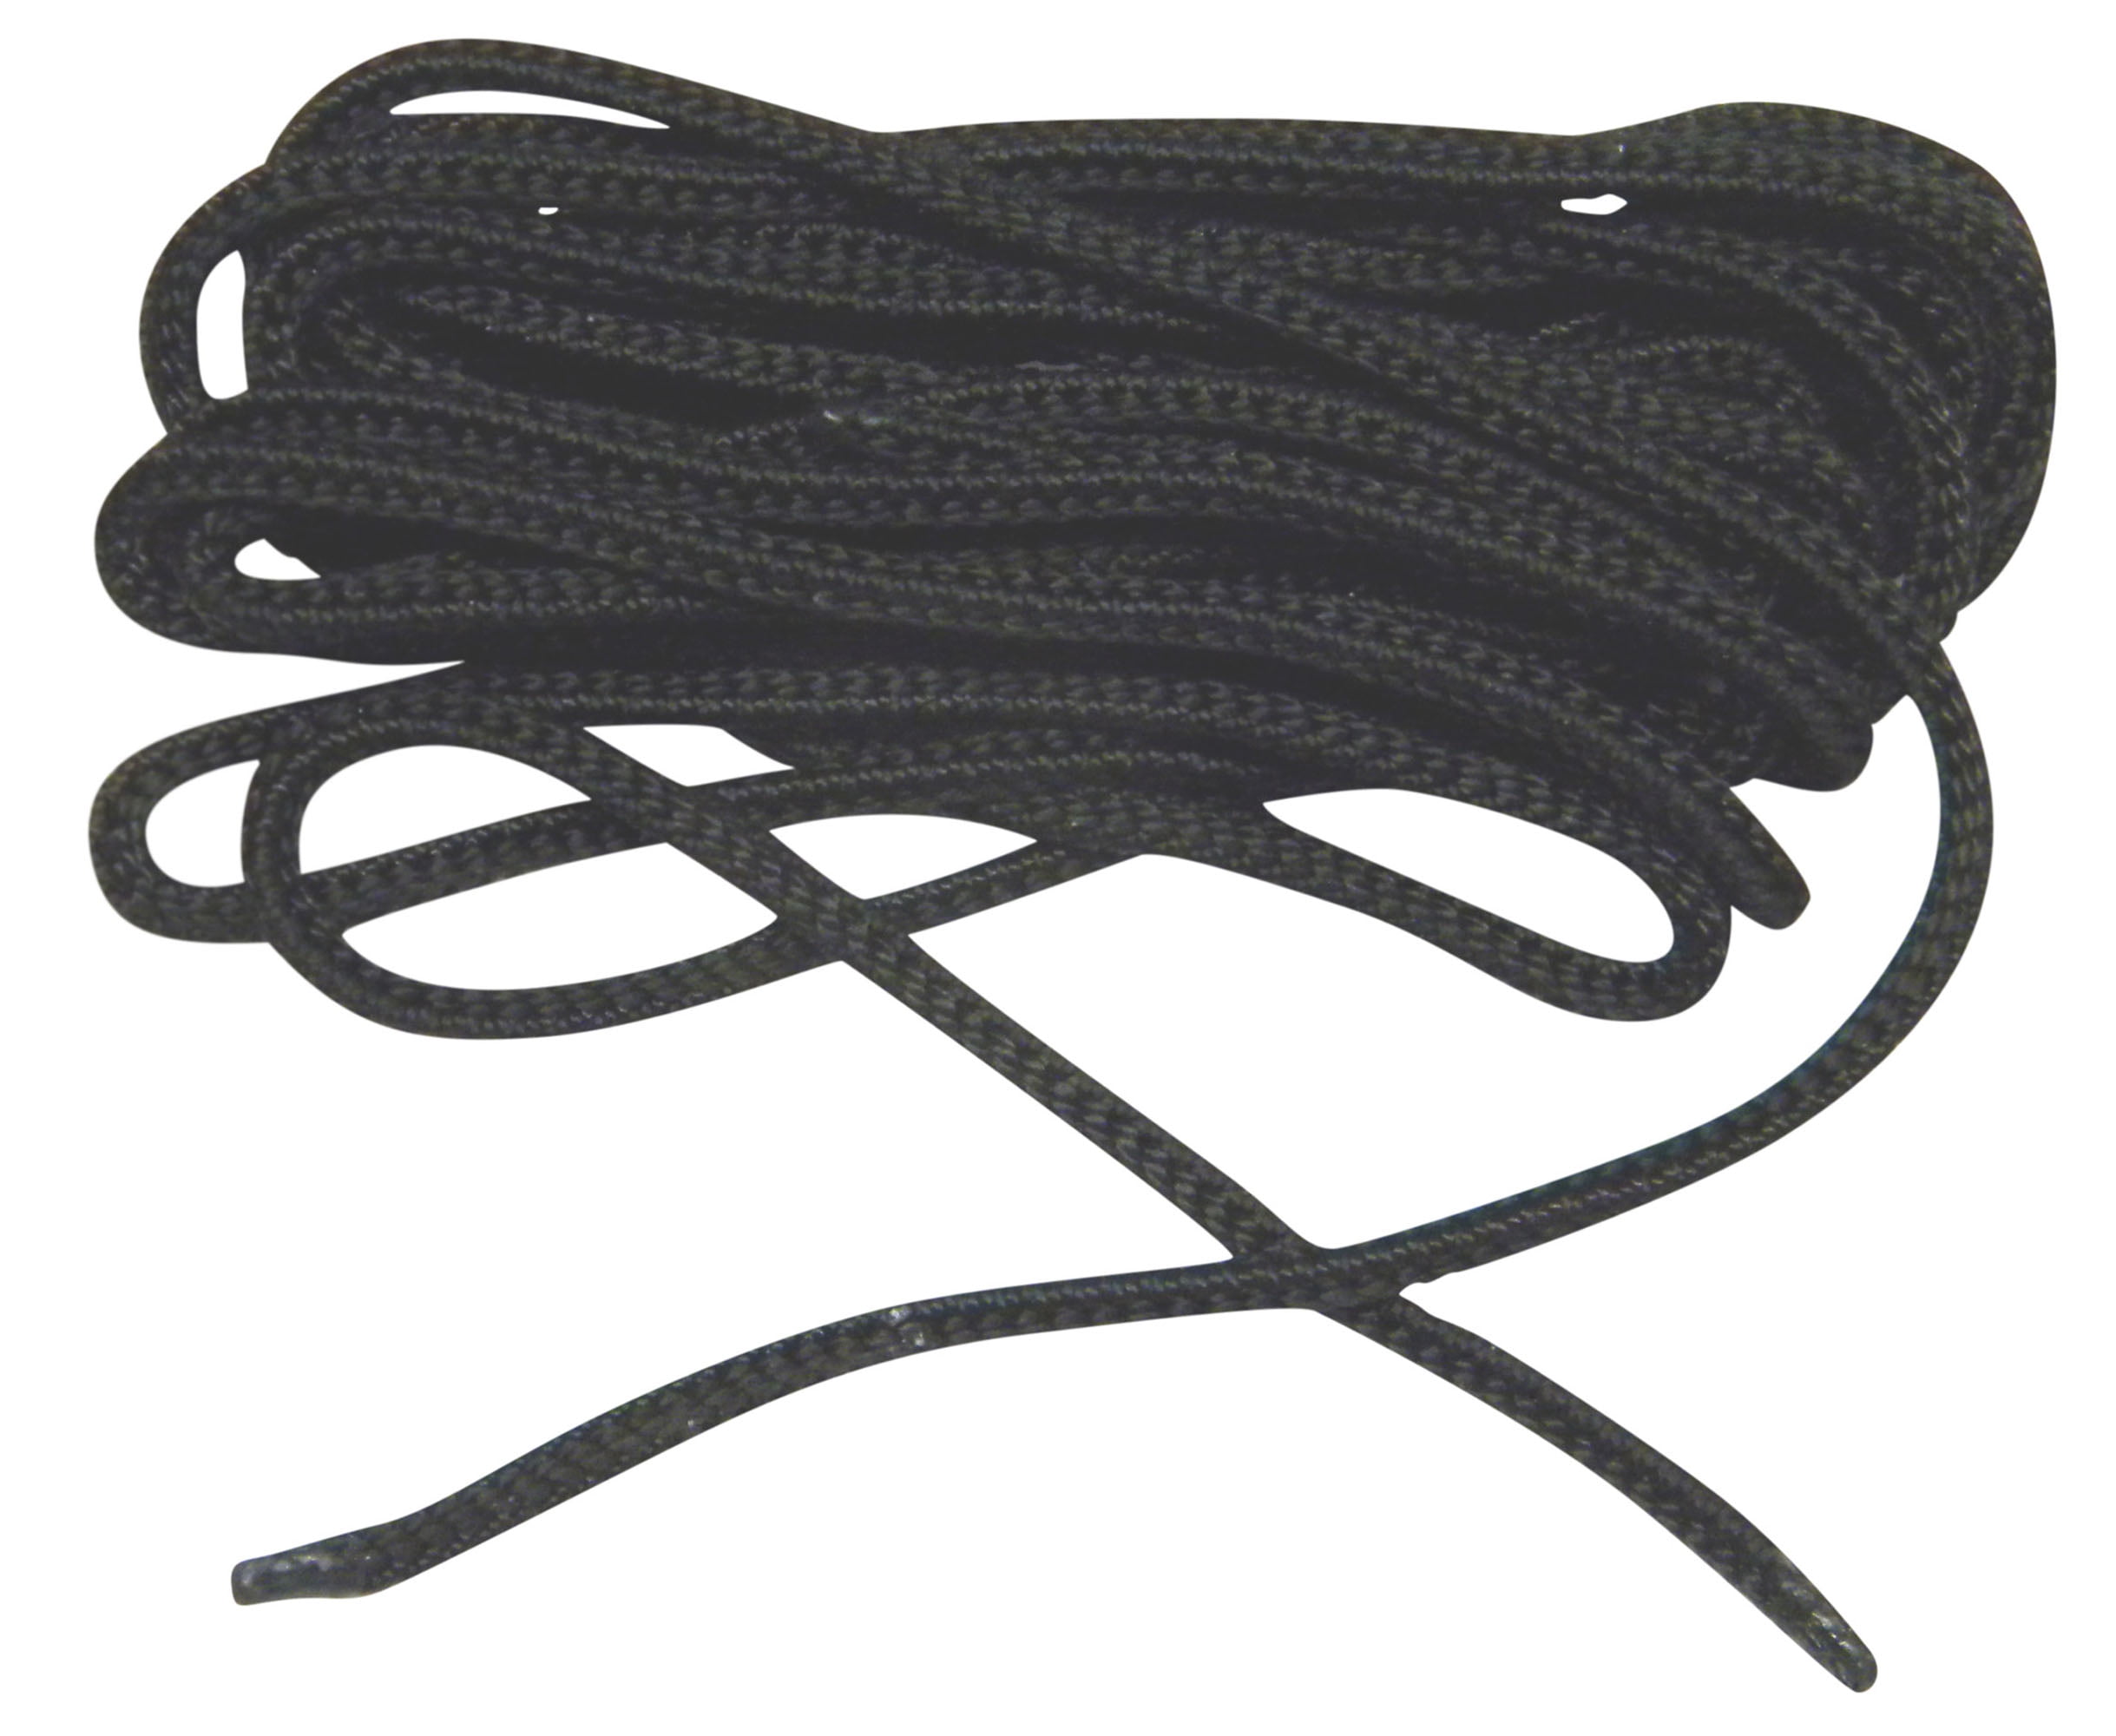 Fused Tips Made in the USA OrthoStep Thin Round Athletic Nylon Shoelaces Work Boot Laces 2 Pair Pack 